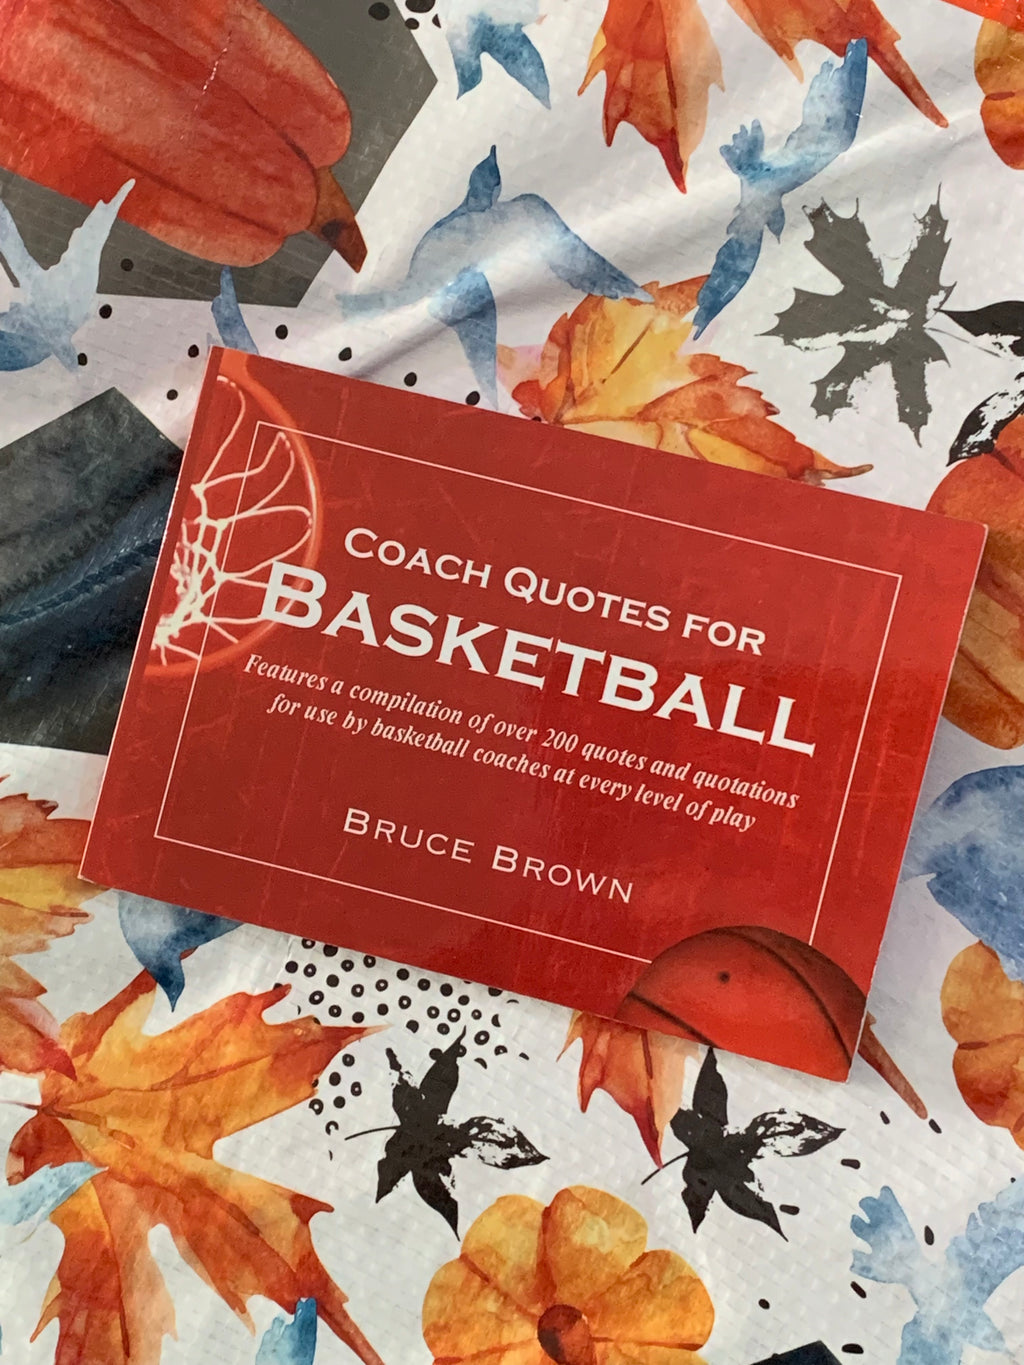 Coach Quotes for Basketball- By Bruce Brown